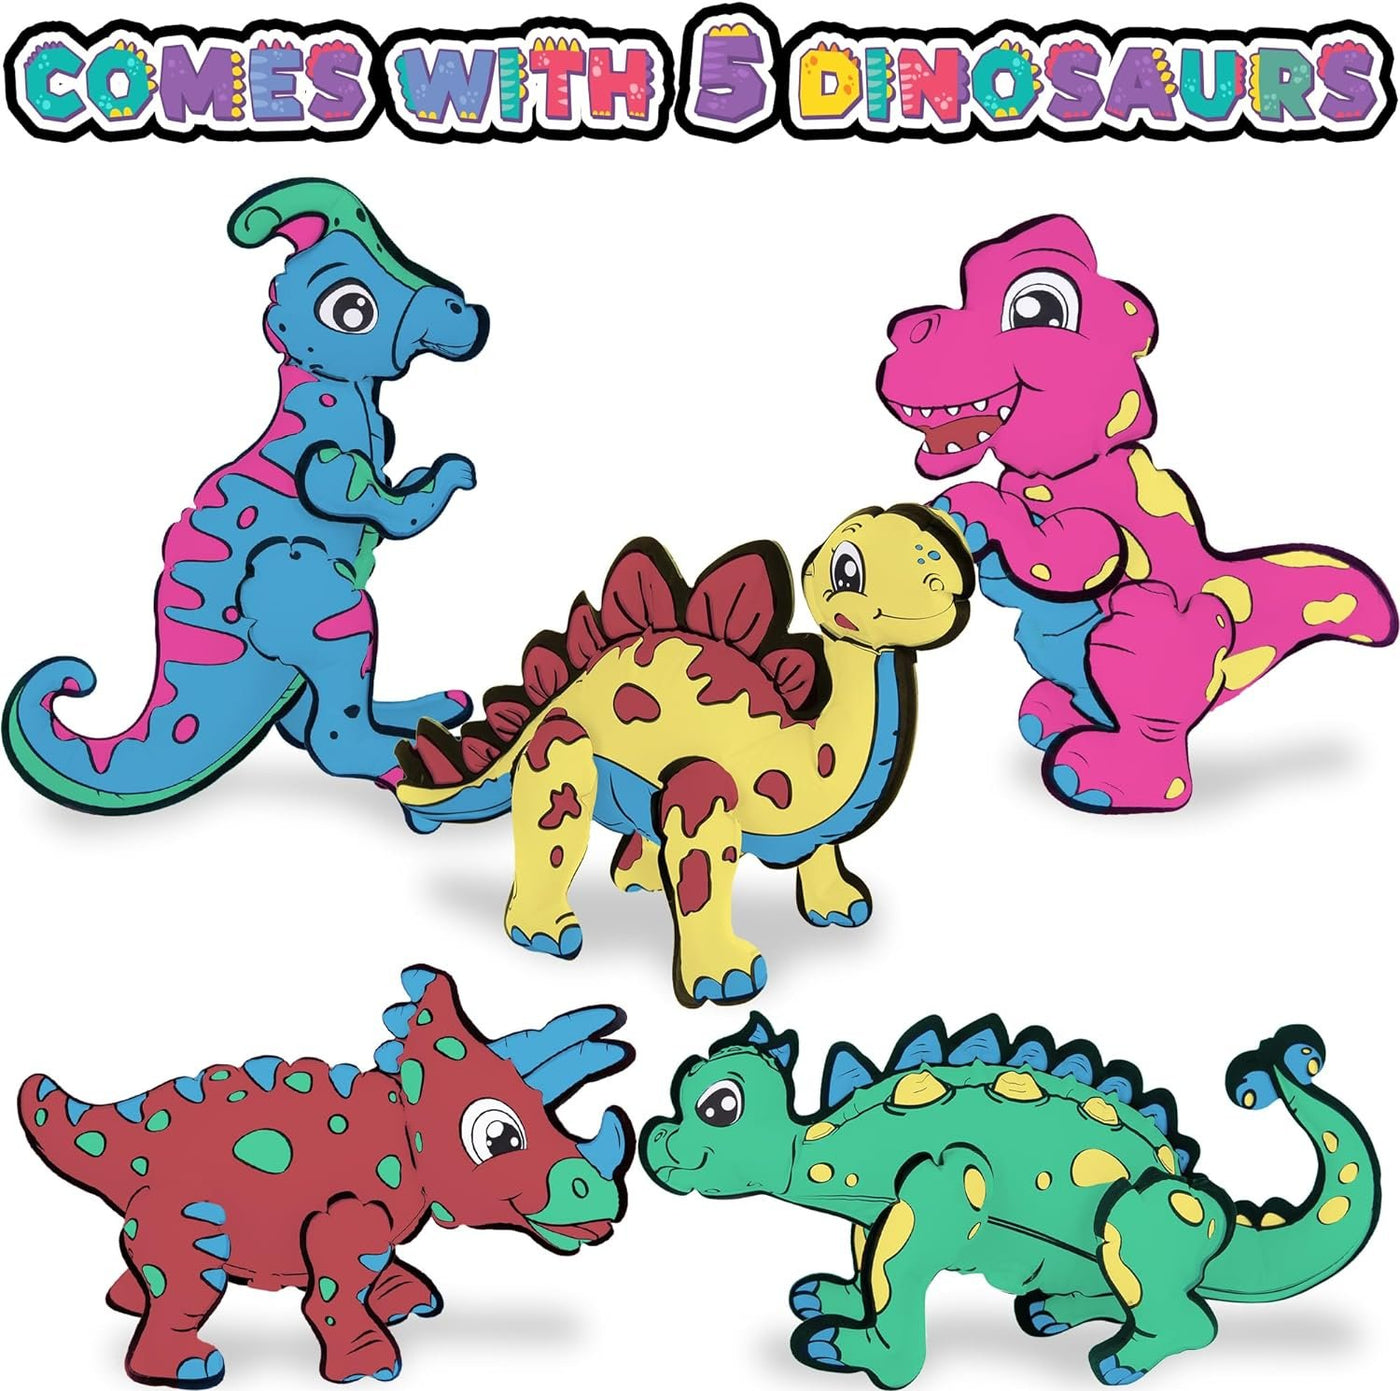 ArtCreativity Kids Inflatable Dinosaur Coloring Kit - 16 Piece Set - 5 Dinosaur Inflates, 1 Pump, and 10 Markers - Dinosaur Arts and Crafts for Kids Ages 4-8 - Dinosaur Birthday Party Decorations